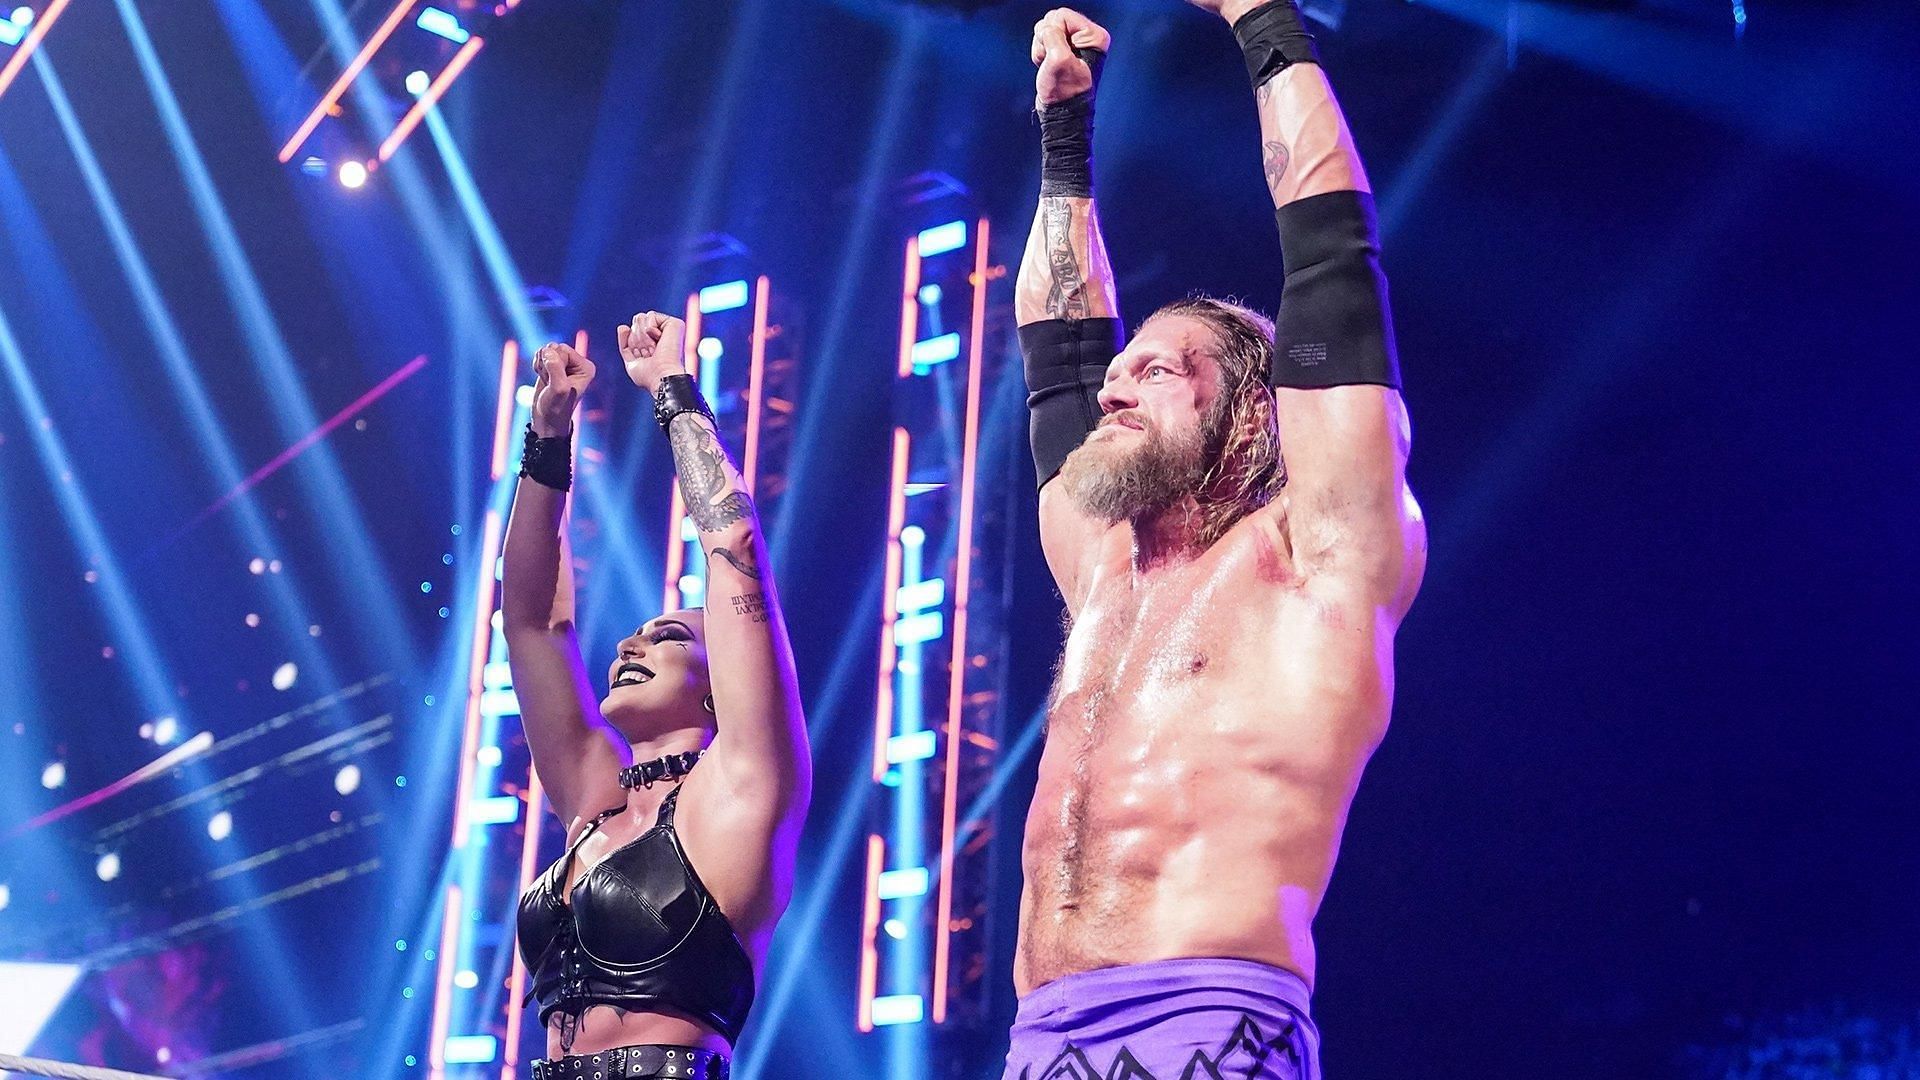 Edge with Rhea Ripley after he defeated AJ Styles at WrestleMania Backlash